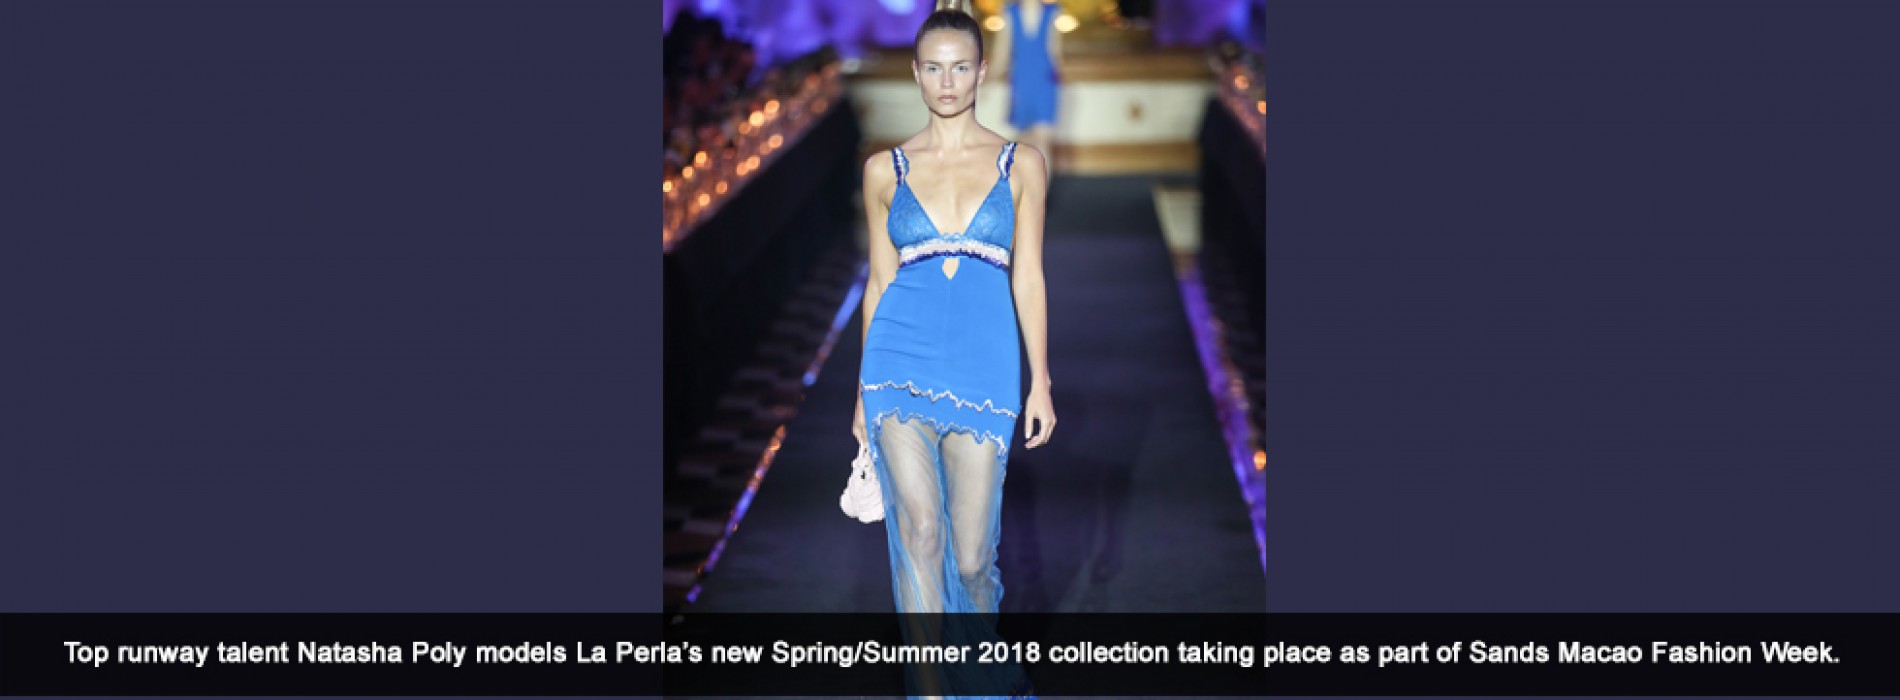 La Perla launches new SS18 collection at Exclusive Gala Dinner for inaugural Sands Macao Fashion Week